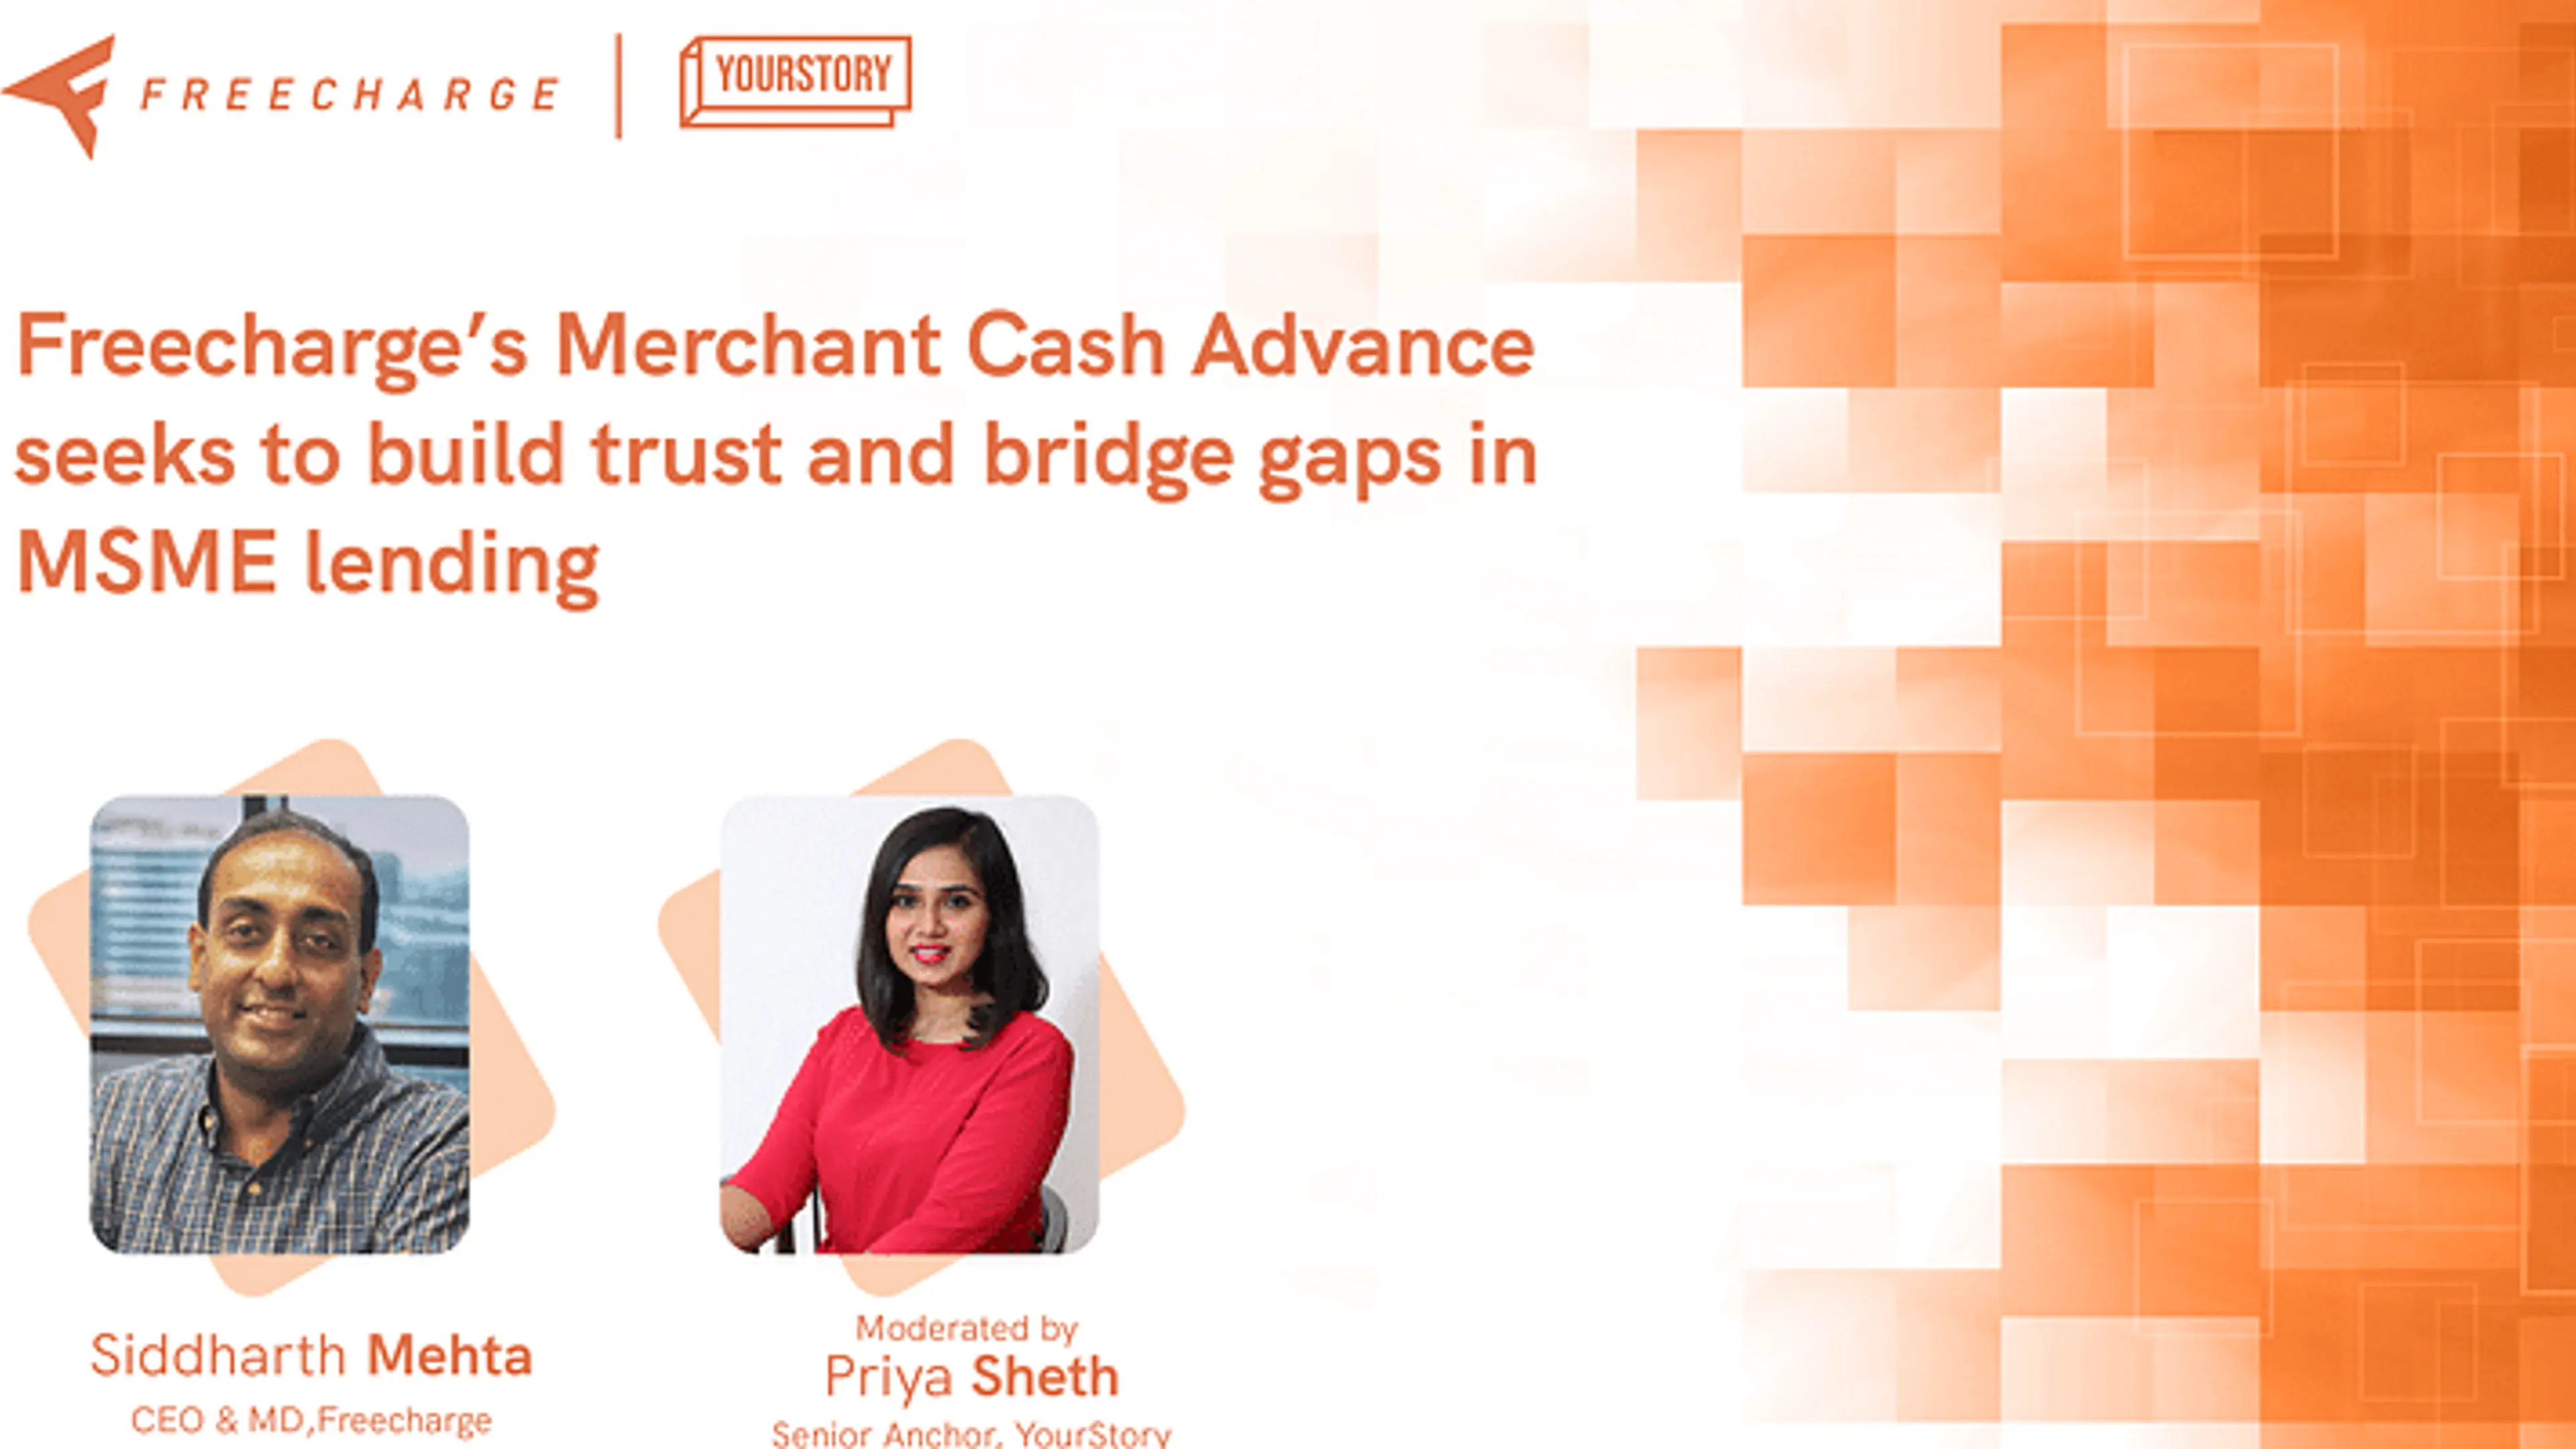 Freecharge’s Merchant Cash Advance aims to build trust in the MSME lending space  